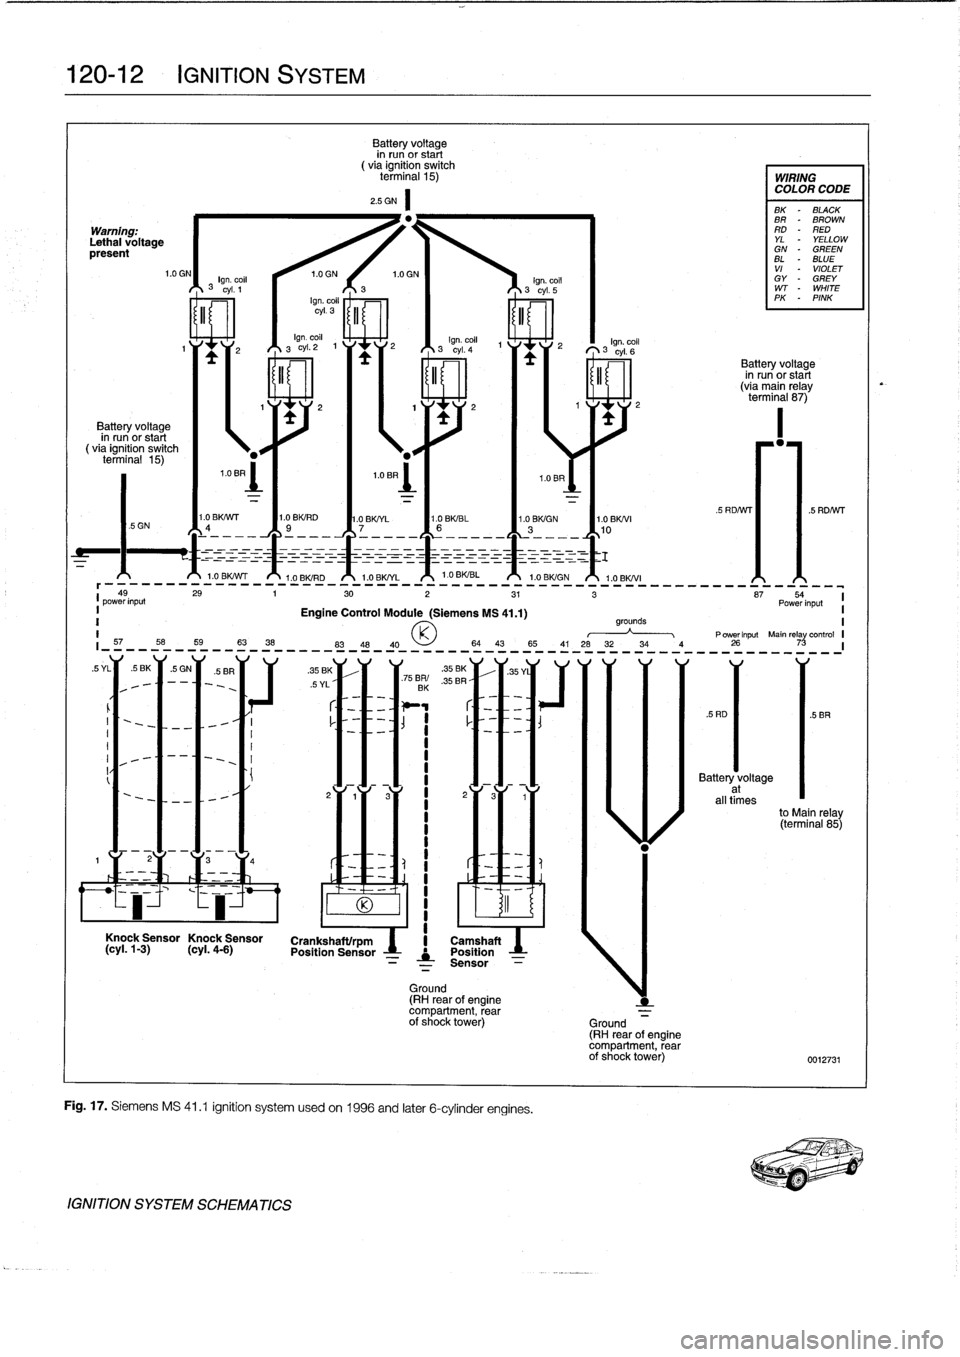 BMW 325i 1992 E36 Service Manual 
120-12

	

IGNITION
SYSTEM

Warning
.
Lethal
voltagepresent

Battery
voltage
in
run
or
start
(via
ignitíon
switch
terminal
15)

I
t

IGNITION
SYSTEM
SCHEMATICS

Battery
voltage
in
run
or
start
(
via